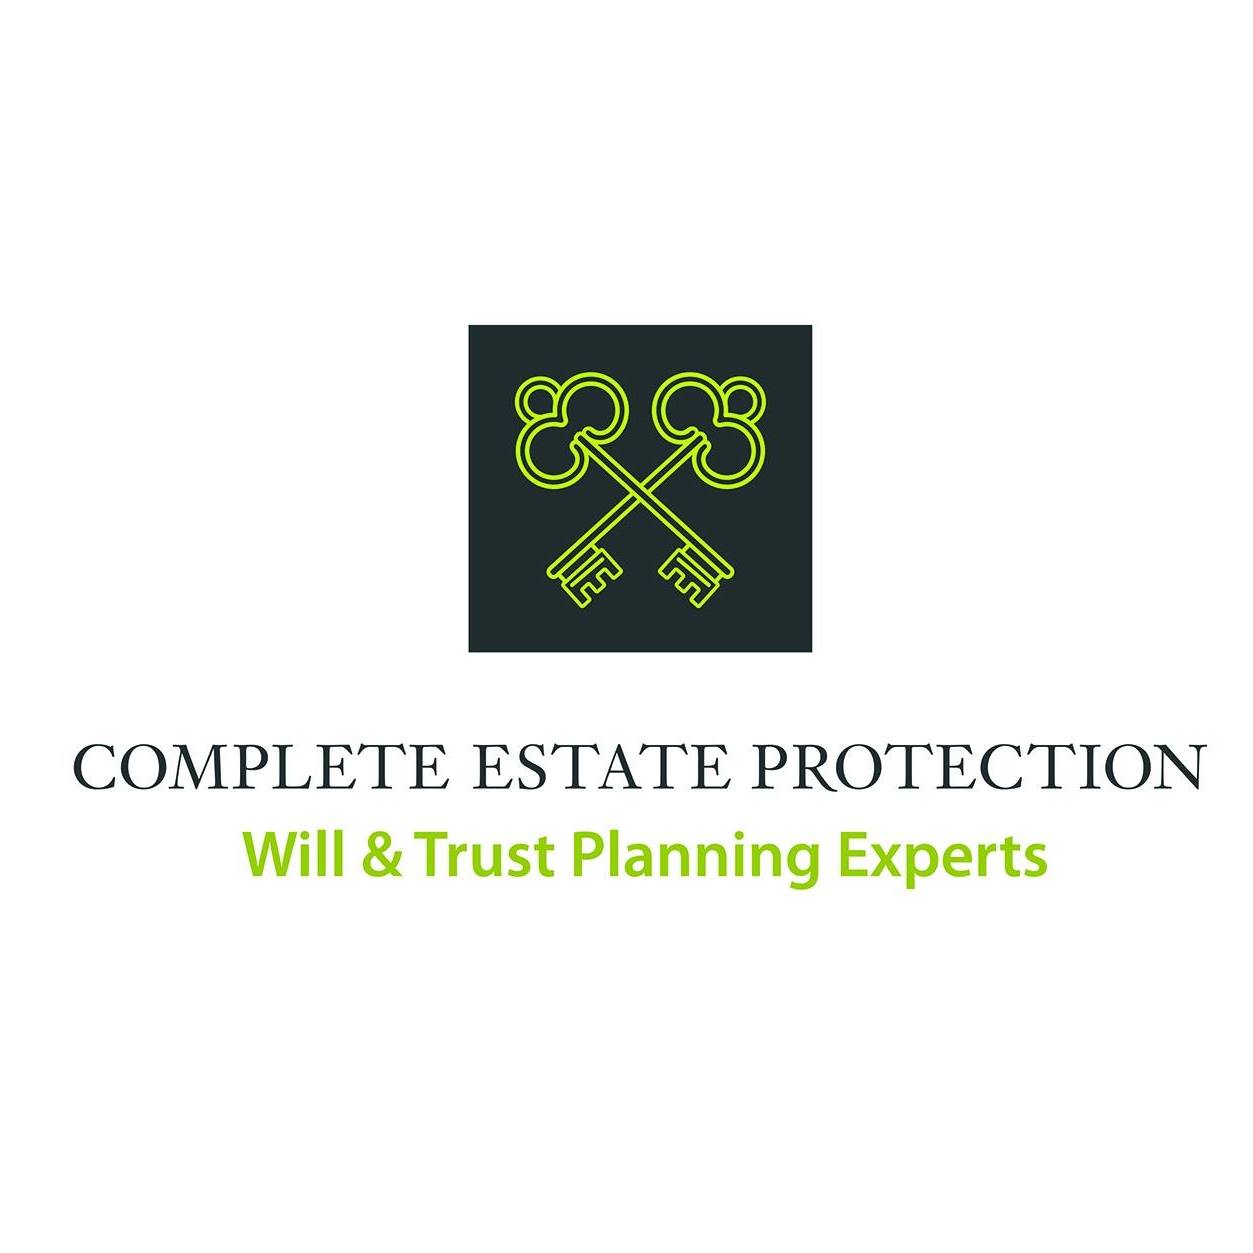 Logo of Complete Estate Protection